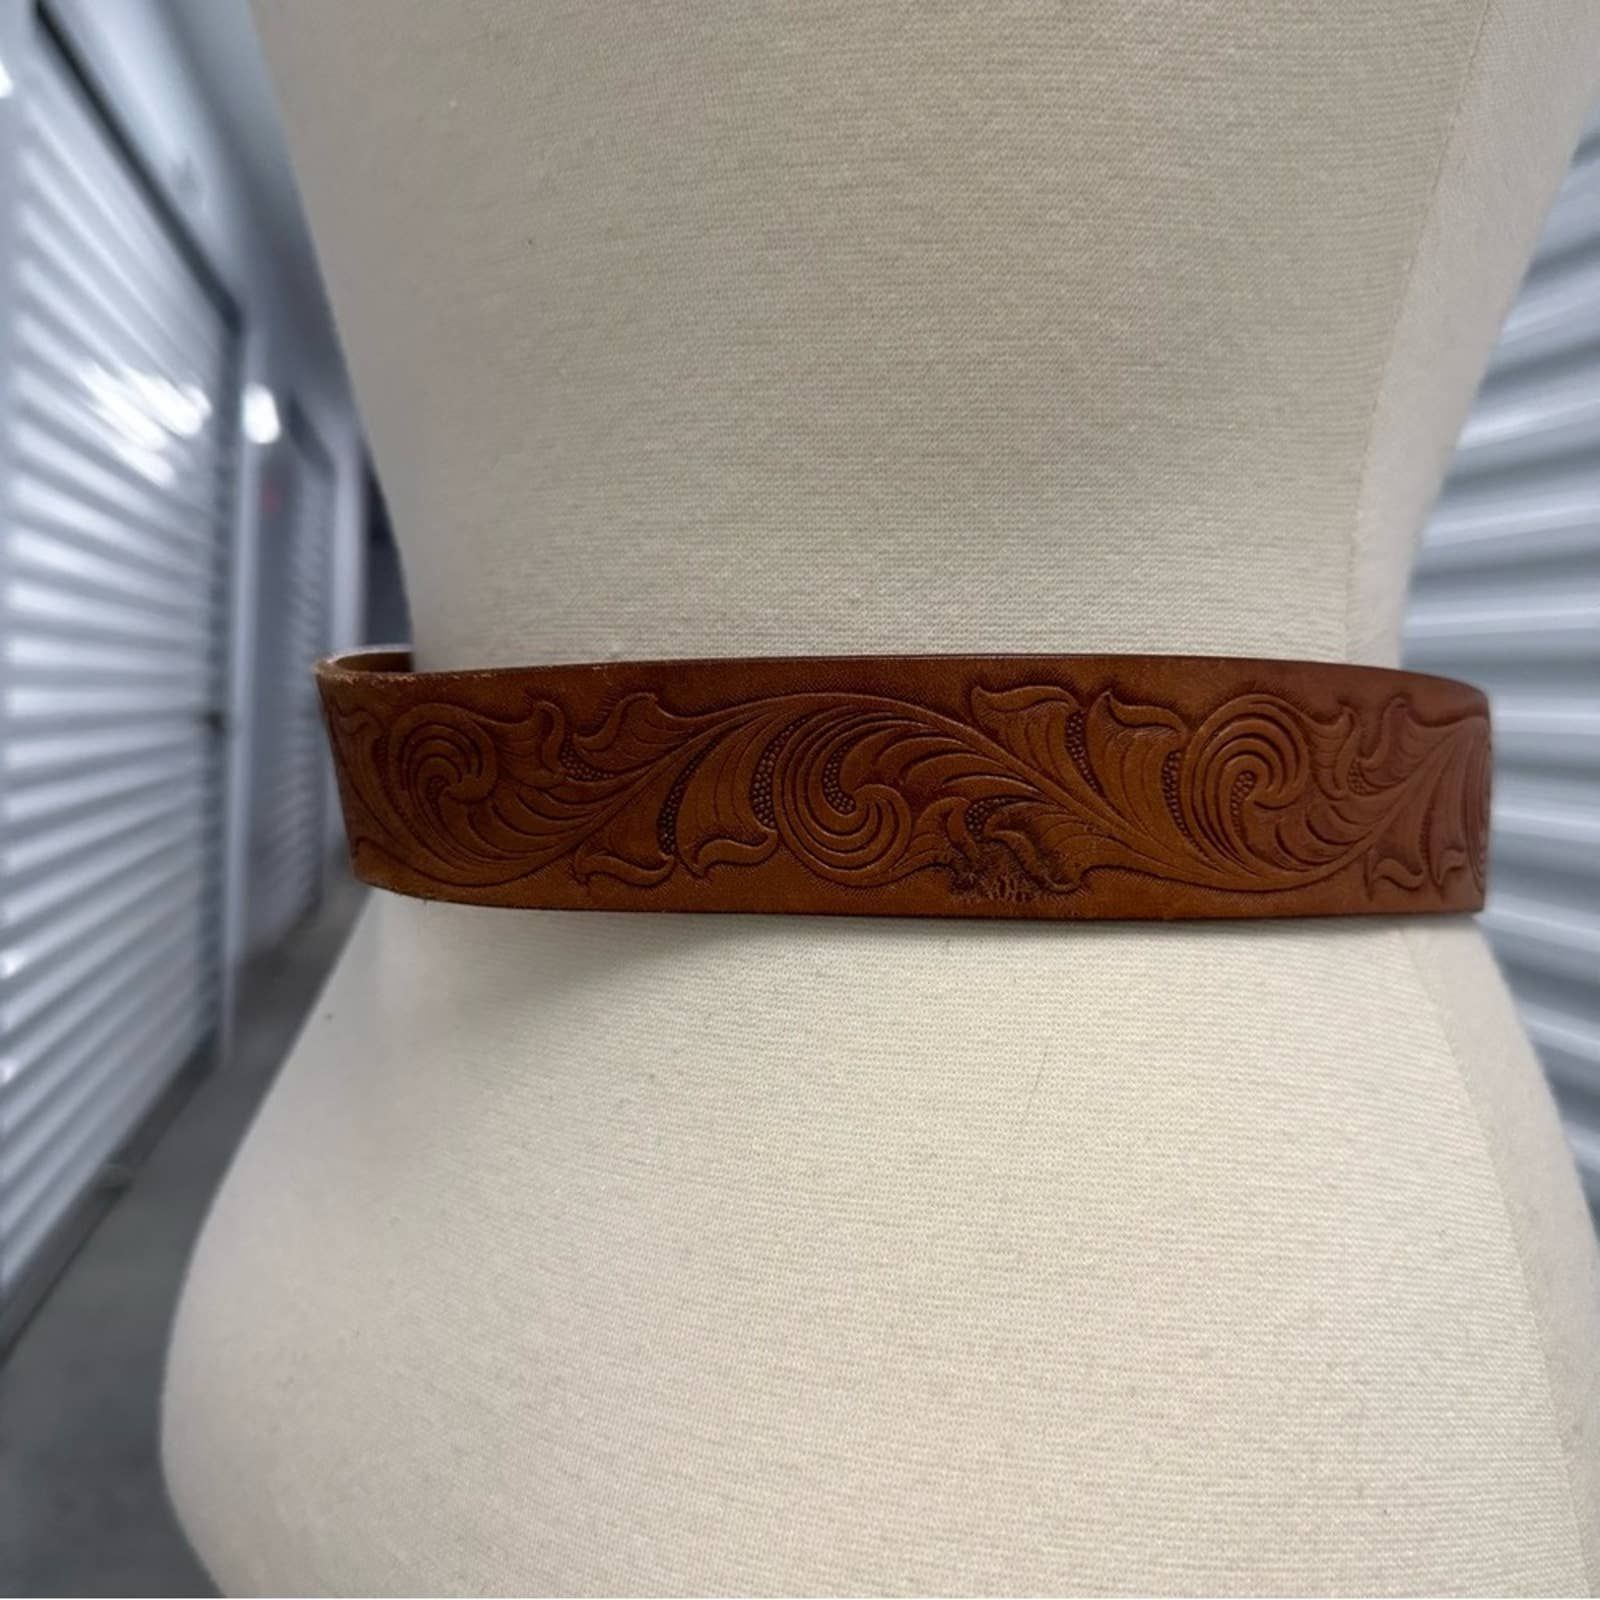 Vintage Vintage Tooled Western Rawhide embossed leather belt 26-28" Size ONE SIZE - 2 Preview